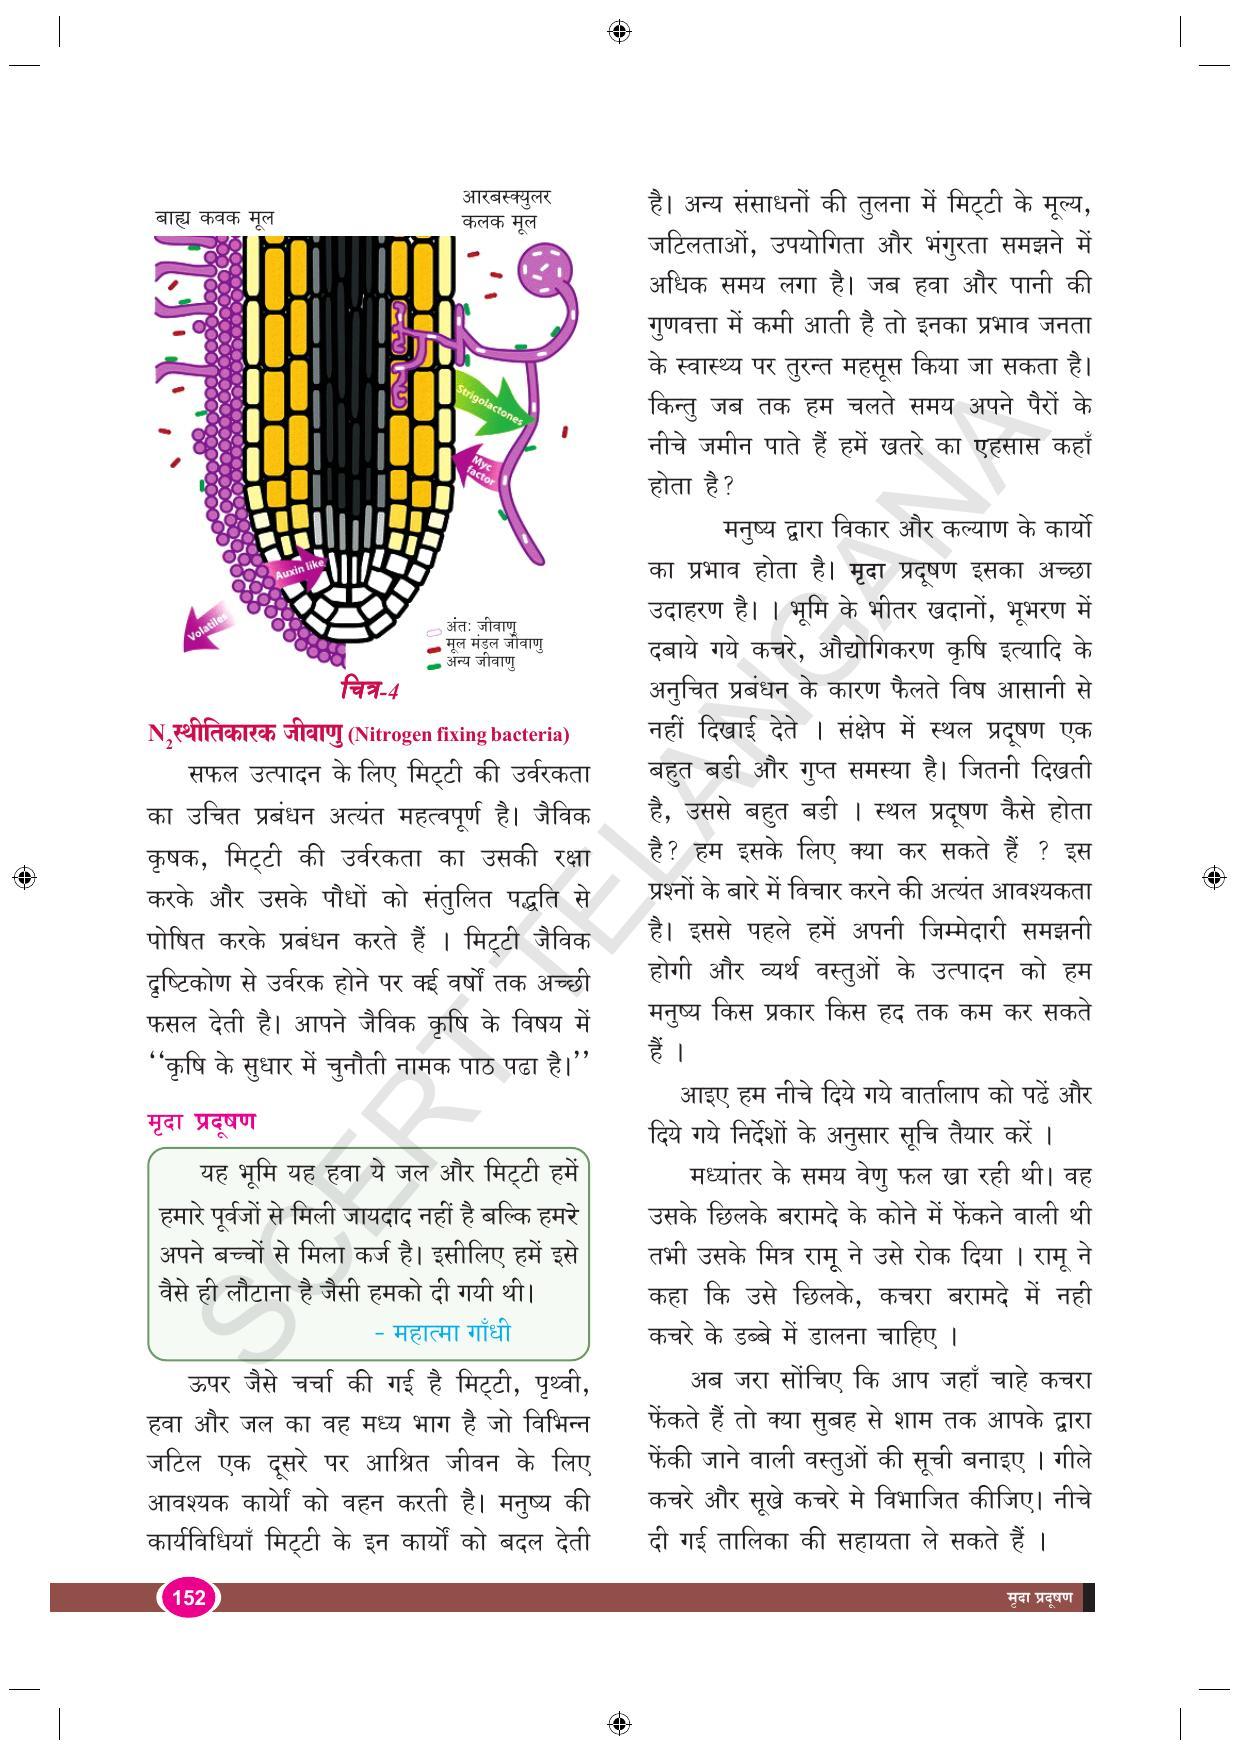 TS SCERT Class 9 Biological Science (Hindi Medium) Text Book - Page 164